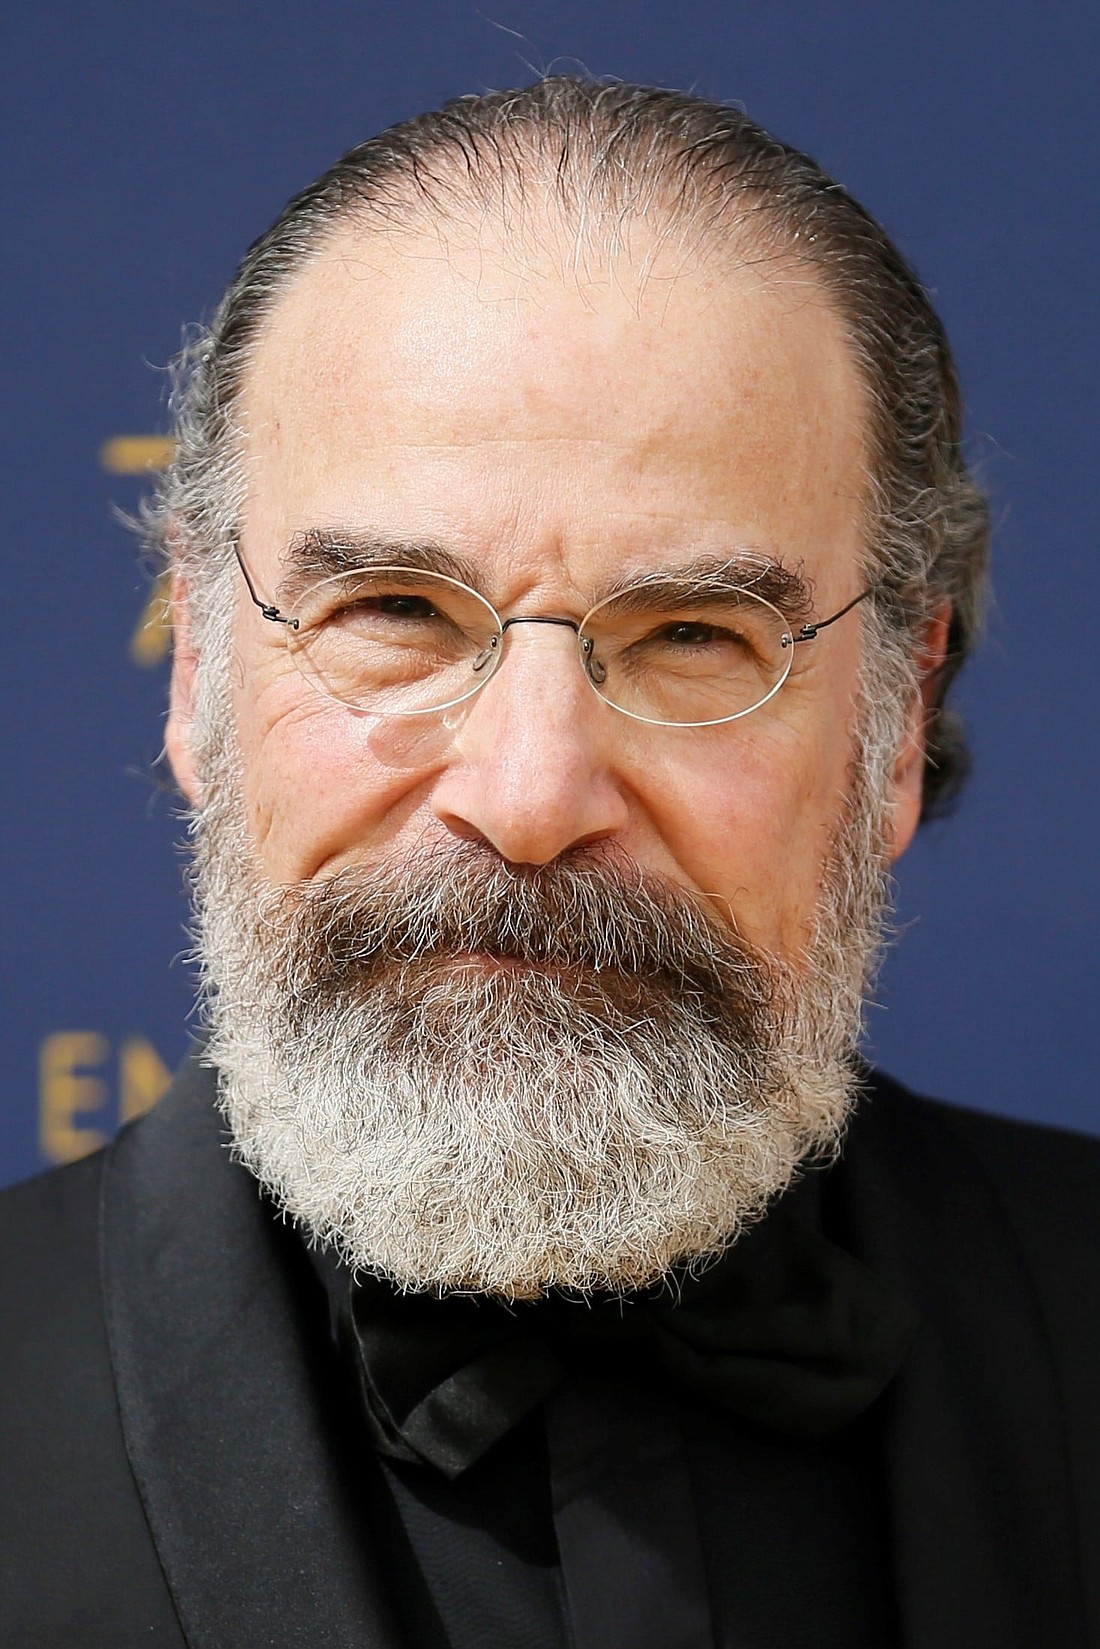 Mandy Patinkin will perform at the Westport Country Playhouse in Westport, Conn., Thurs., Sept. 28. See Nearby In-Person Events for details.